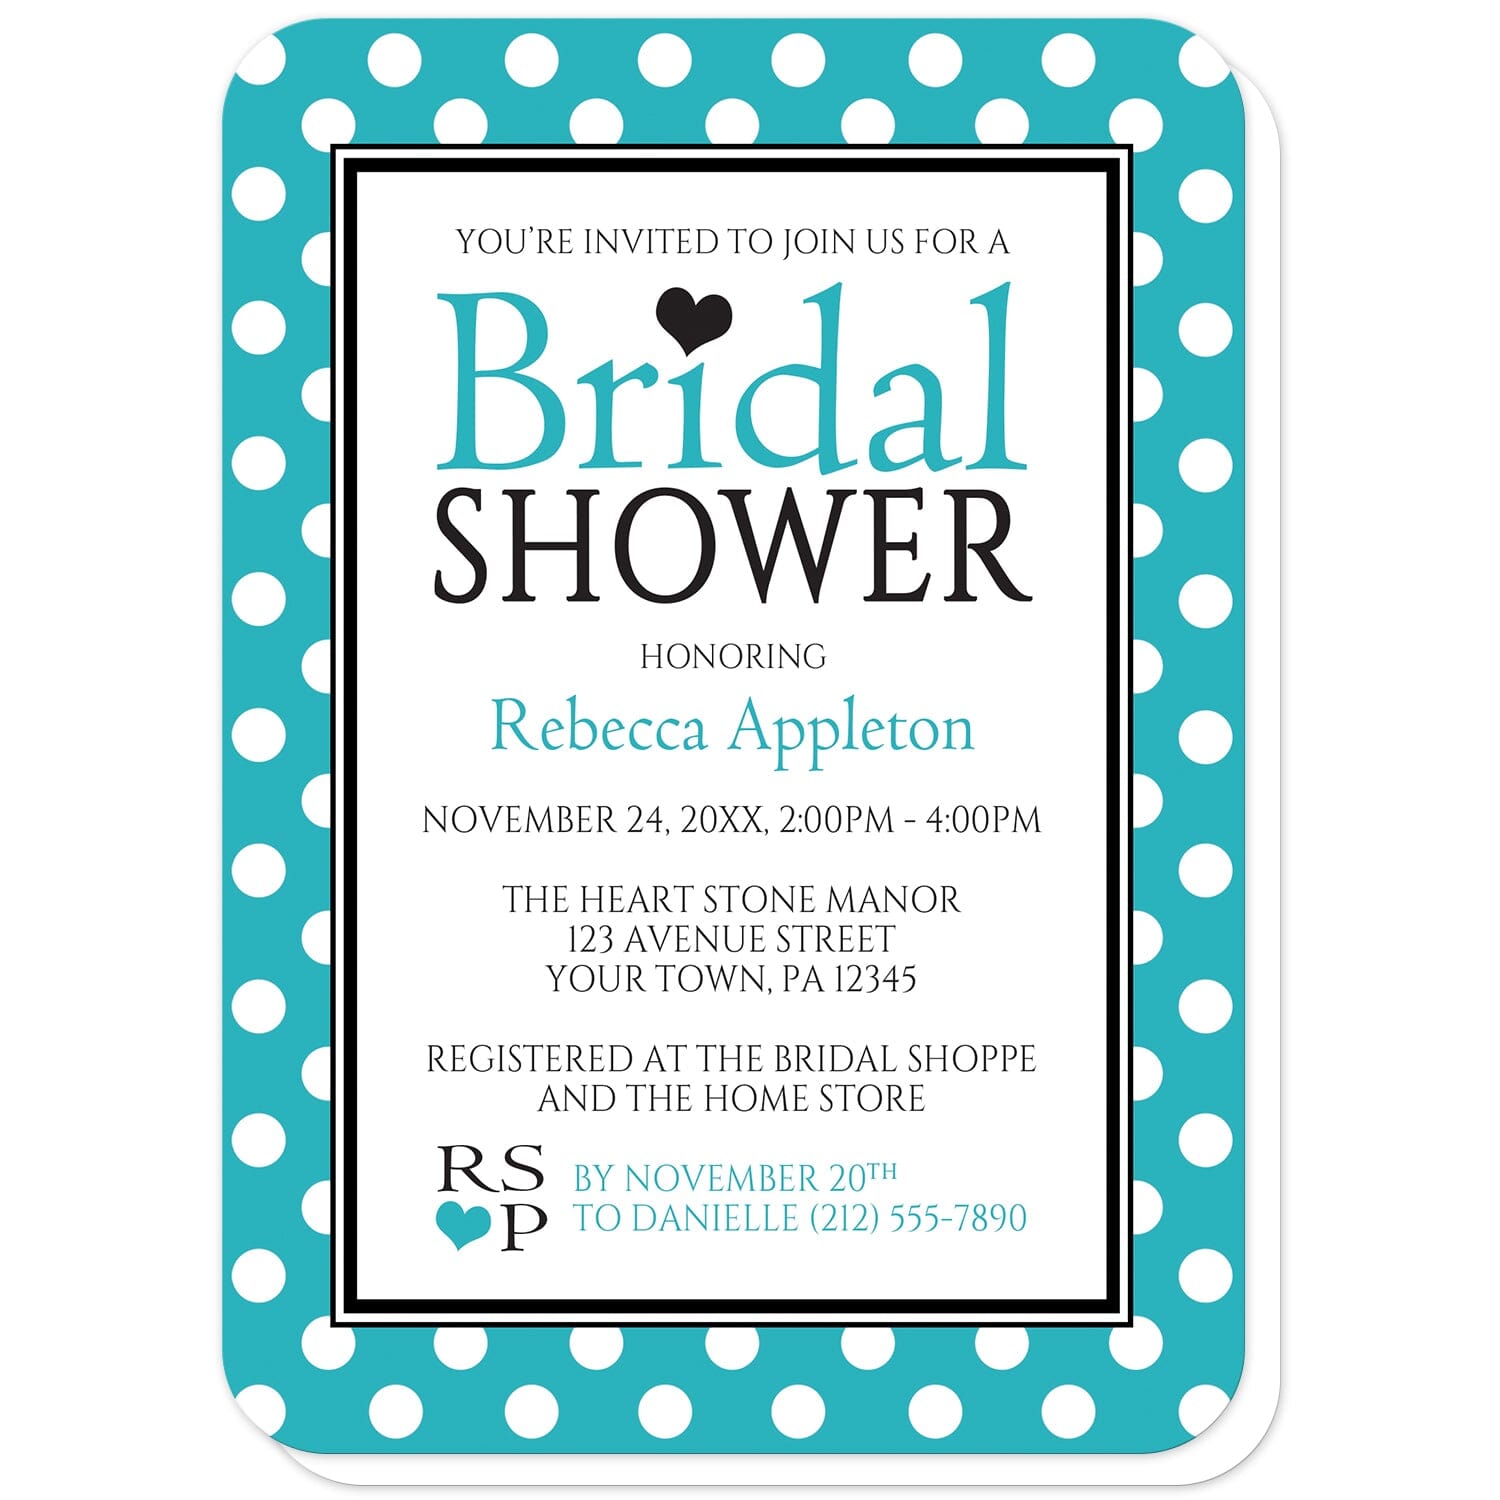 Polka Dot Turquoise Black and White Bridal Shower Invitations (with rounded corners) at Artistically Invited. Stylish polka dot turquoise black and white bridal shower invitations with your personalized bridal shower celebration details custom printed in turquoise and black inside a white rectangle outlined in black and white. The background design of these invitations is a white polka dots pattern over a bold turquoise color.